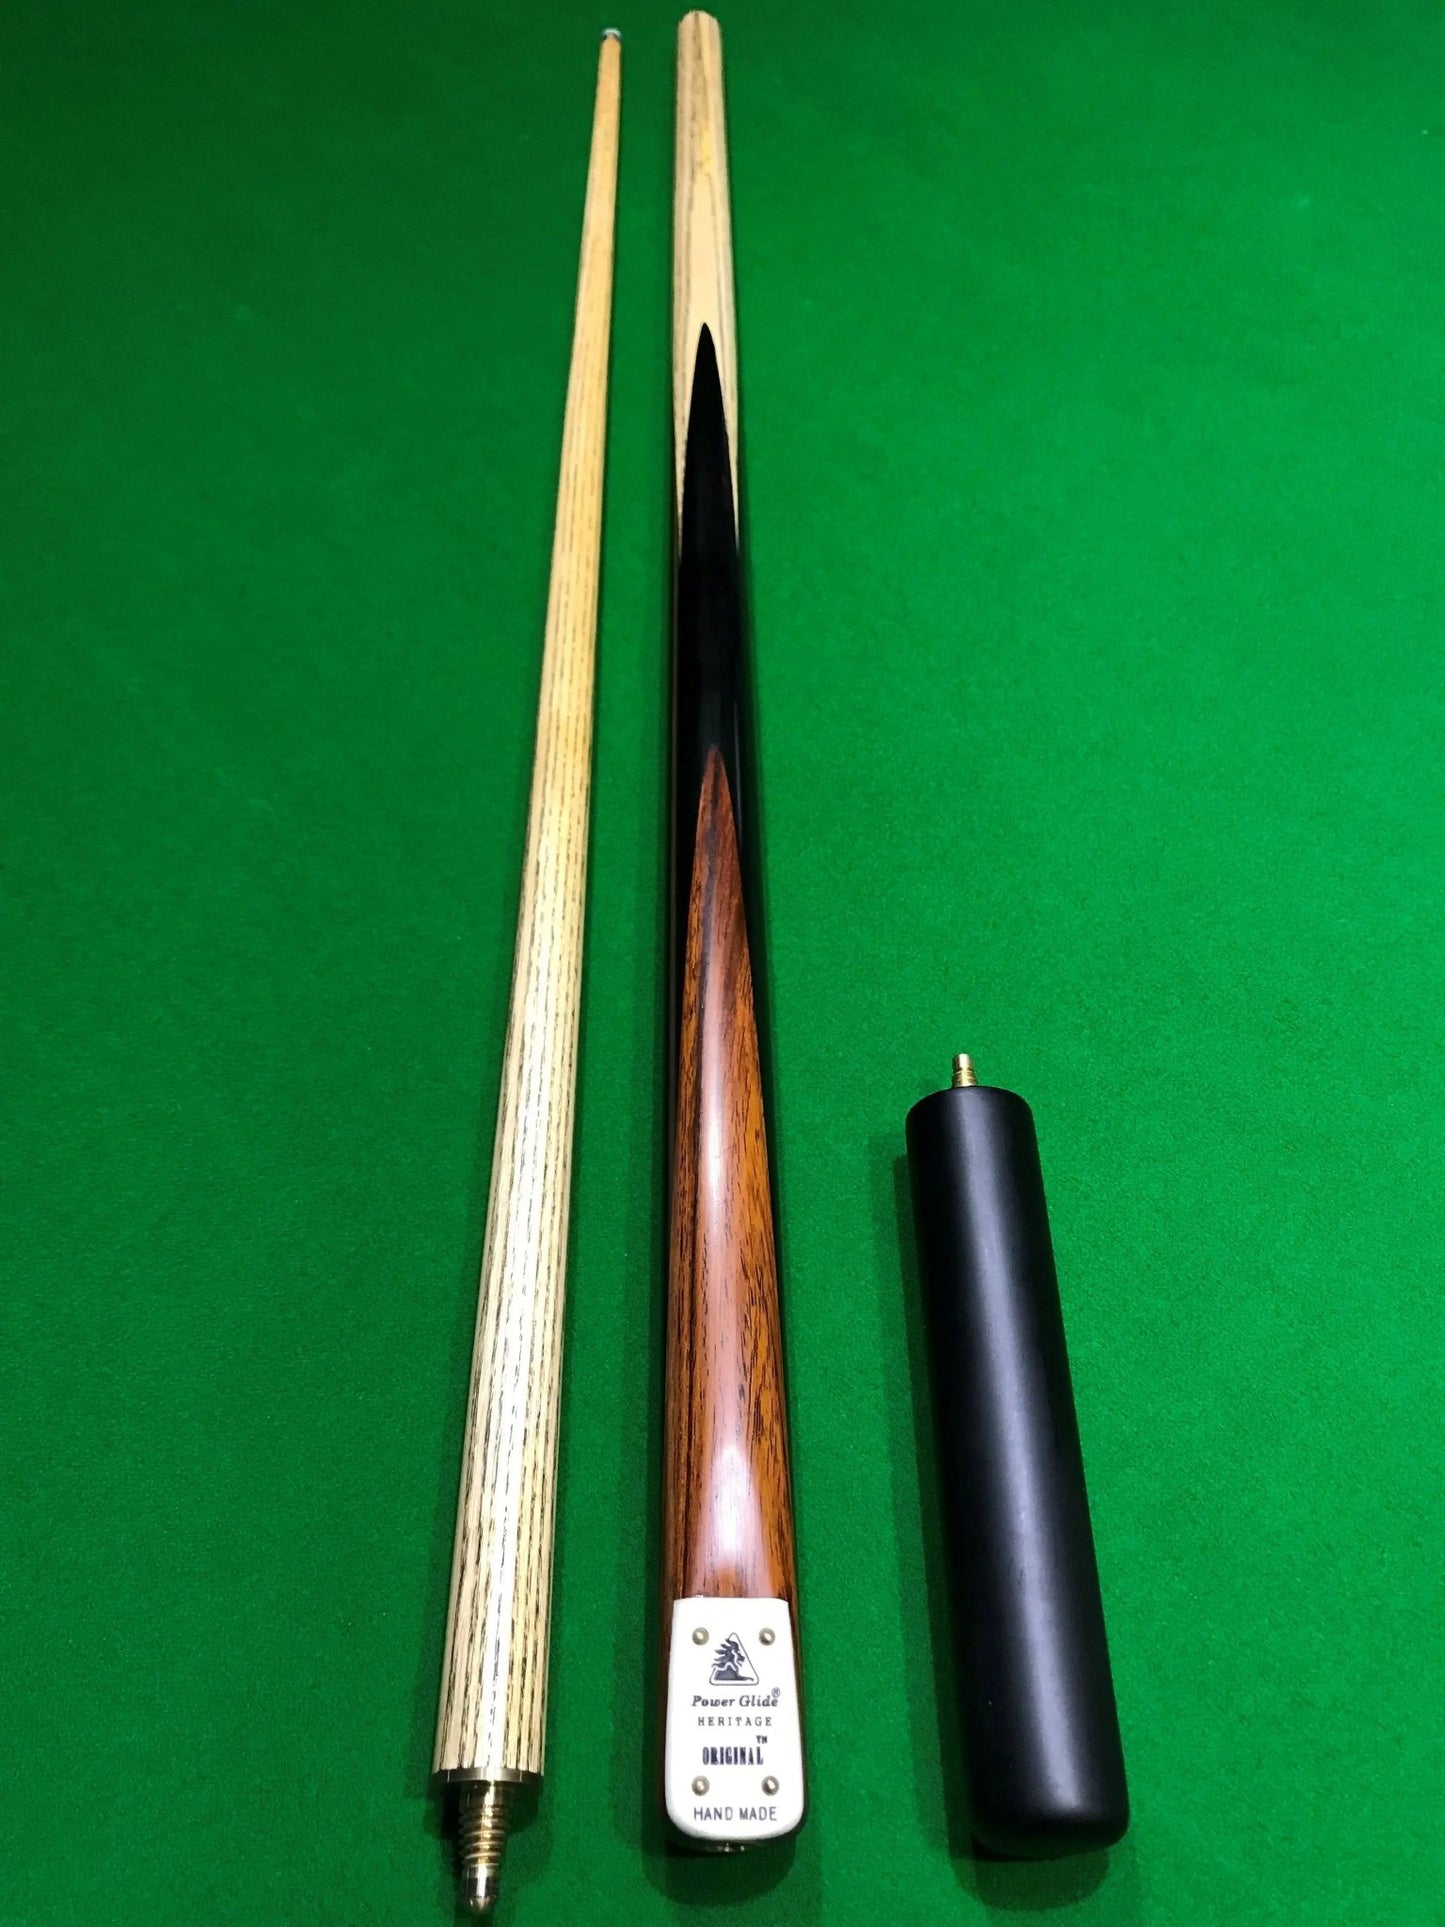 POWERGLIDE Heritage Original Hand Made 1/2 Piece Pool, Snooker & Billiard Ash Cue with Butt Extension - Q-Masters